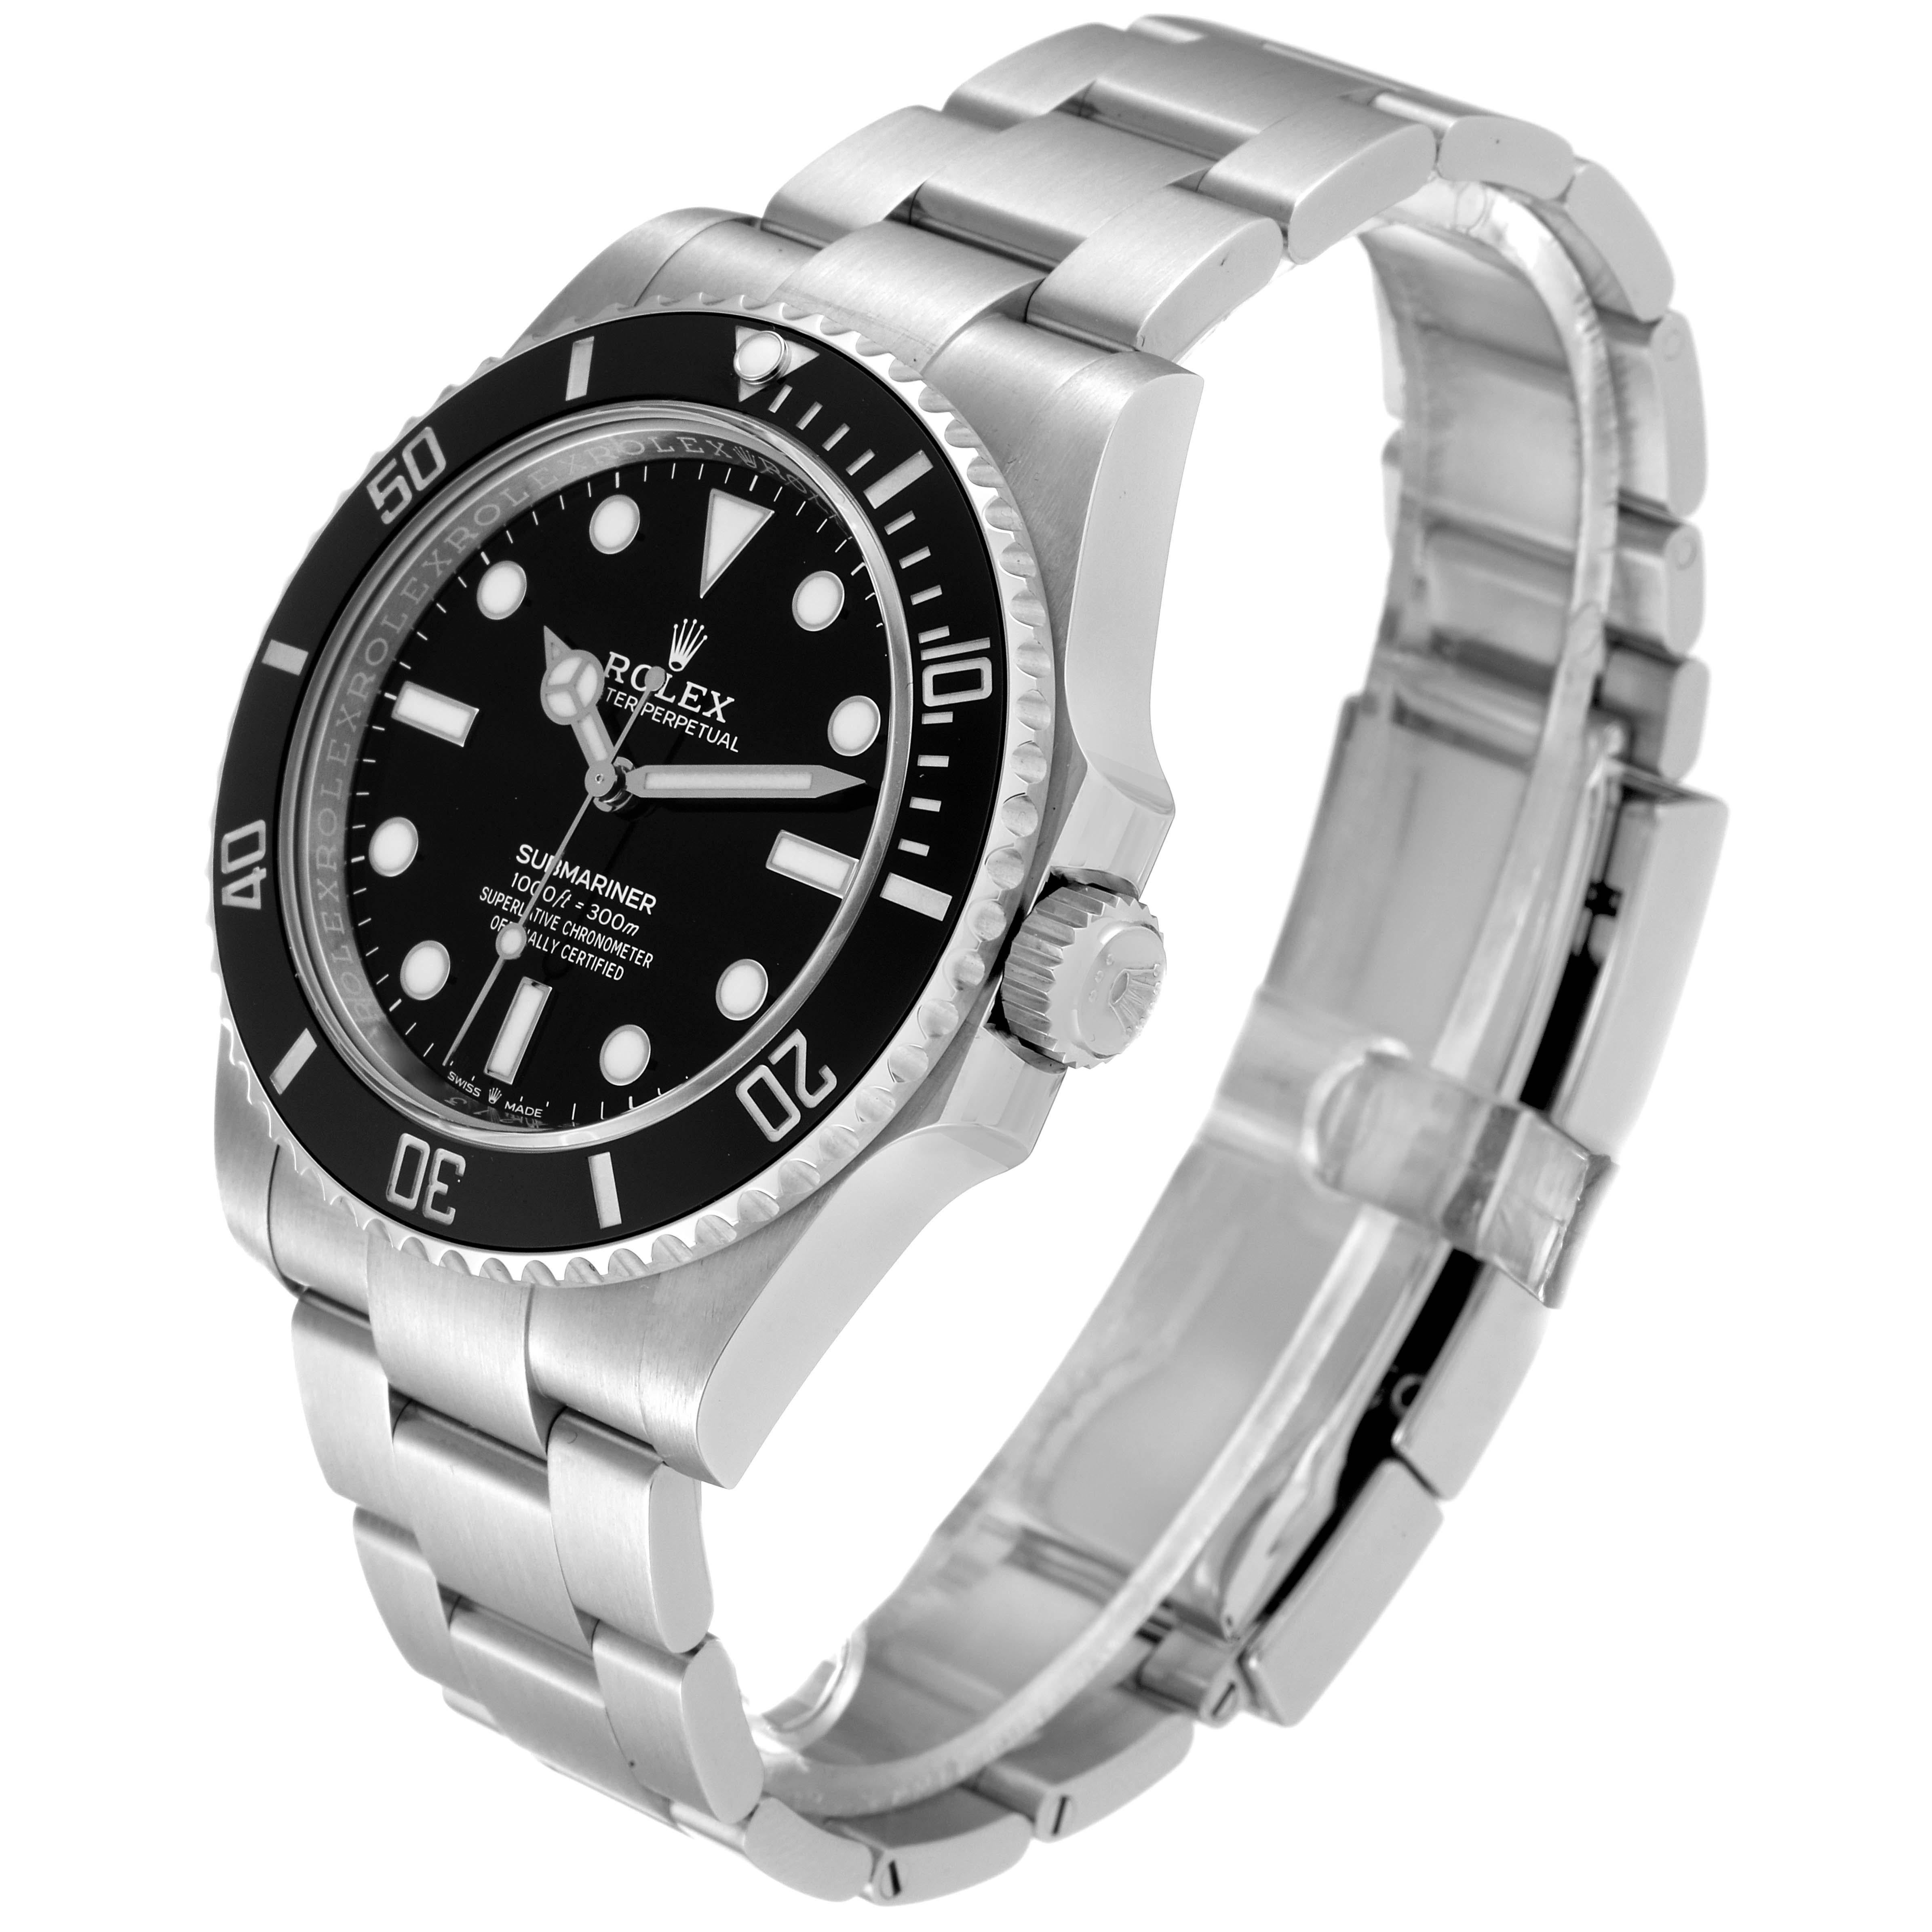 Rolex Submariner Non-Date Ceramic Bezel Steel Mens Watch 124060 Box Card. Officially certified chronometer automatic self-winding movement. Stainless steel case 41.0 mm in diameter. Rolex logo on the crown. Special time-lapse unidirectional rotating